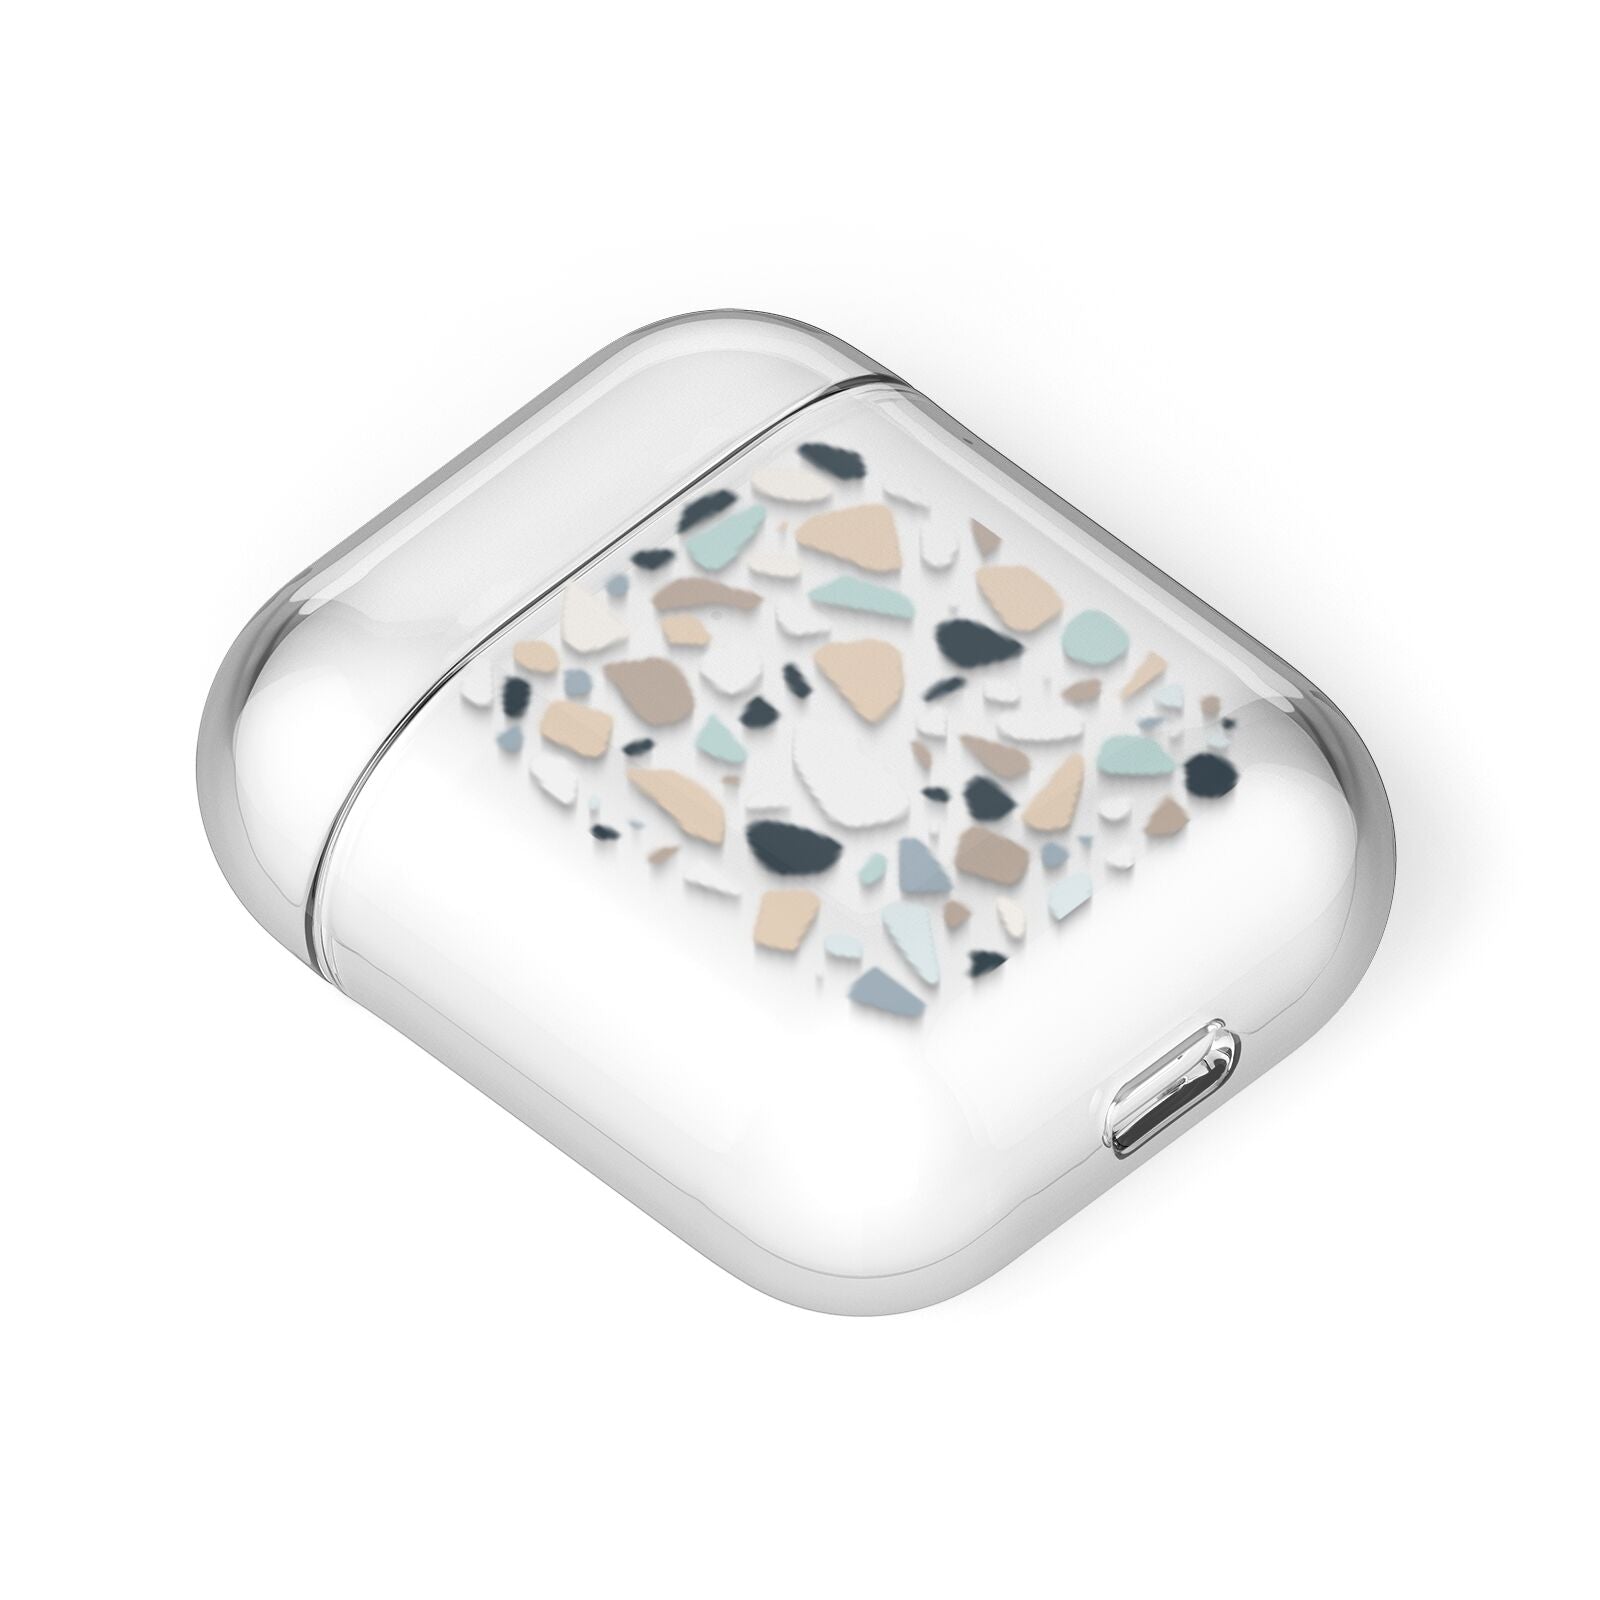 Terrazzo Pattern AirPods Case Laid Flat